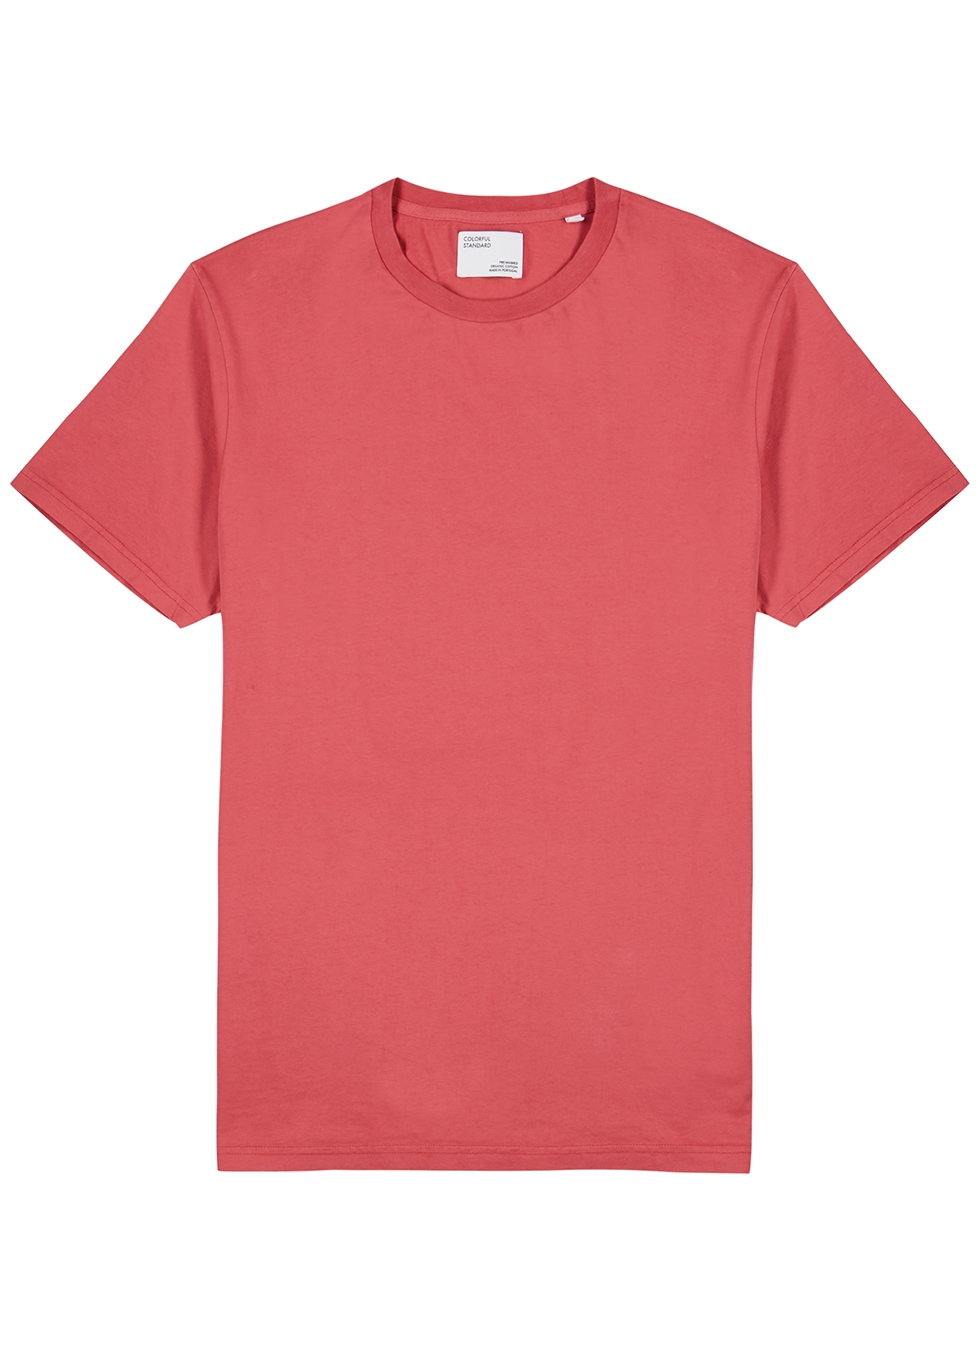 COLORFUL STANDARD Navy cotton T-shirt